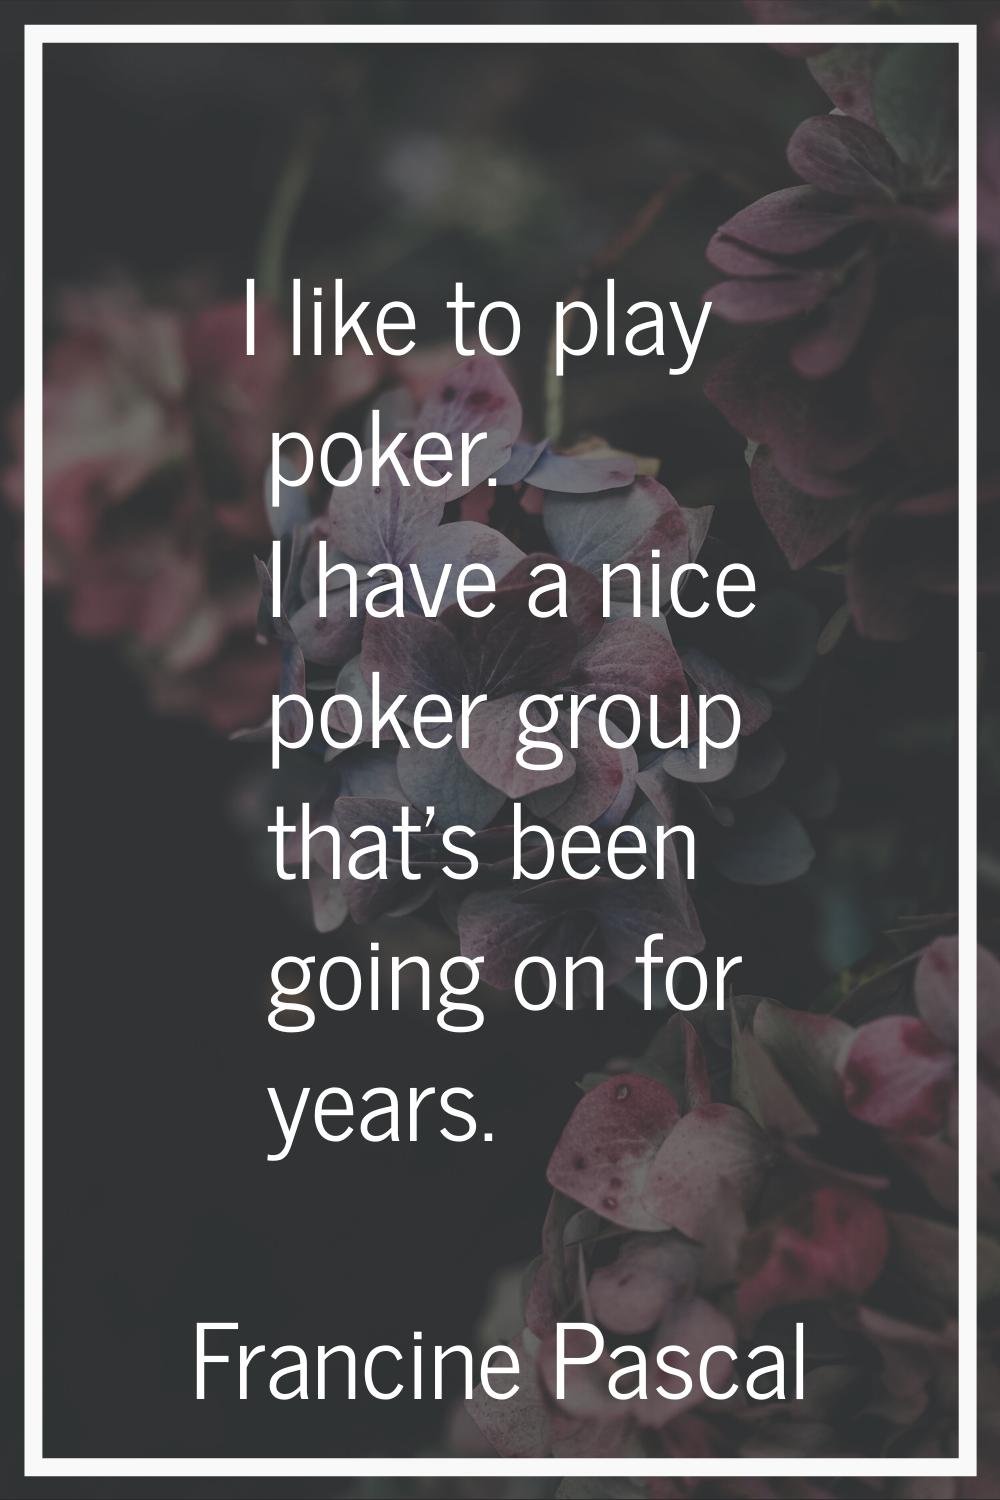 I like to play poker. I have a nice poker group that's been going on for years.